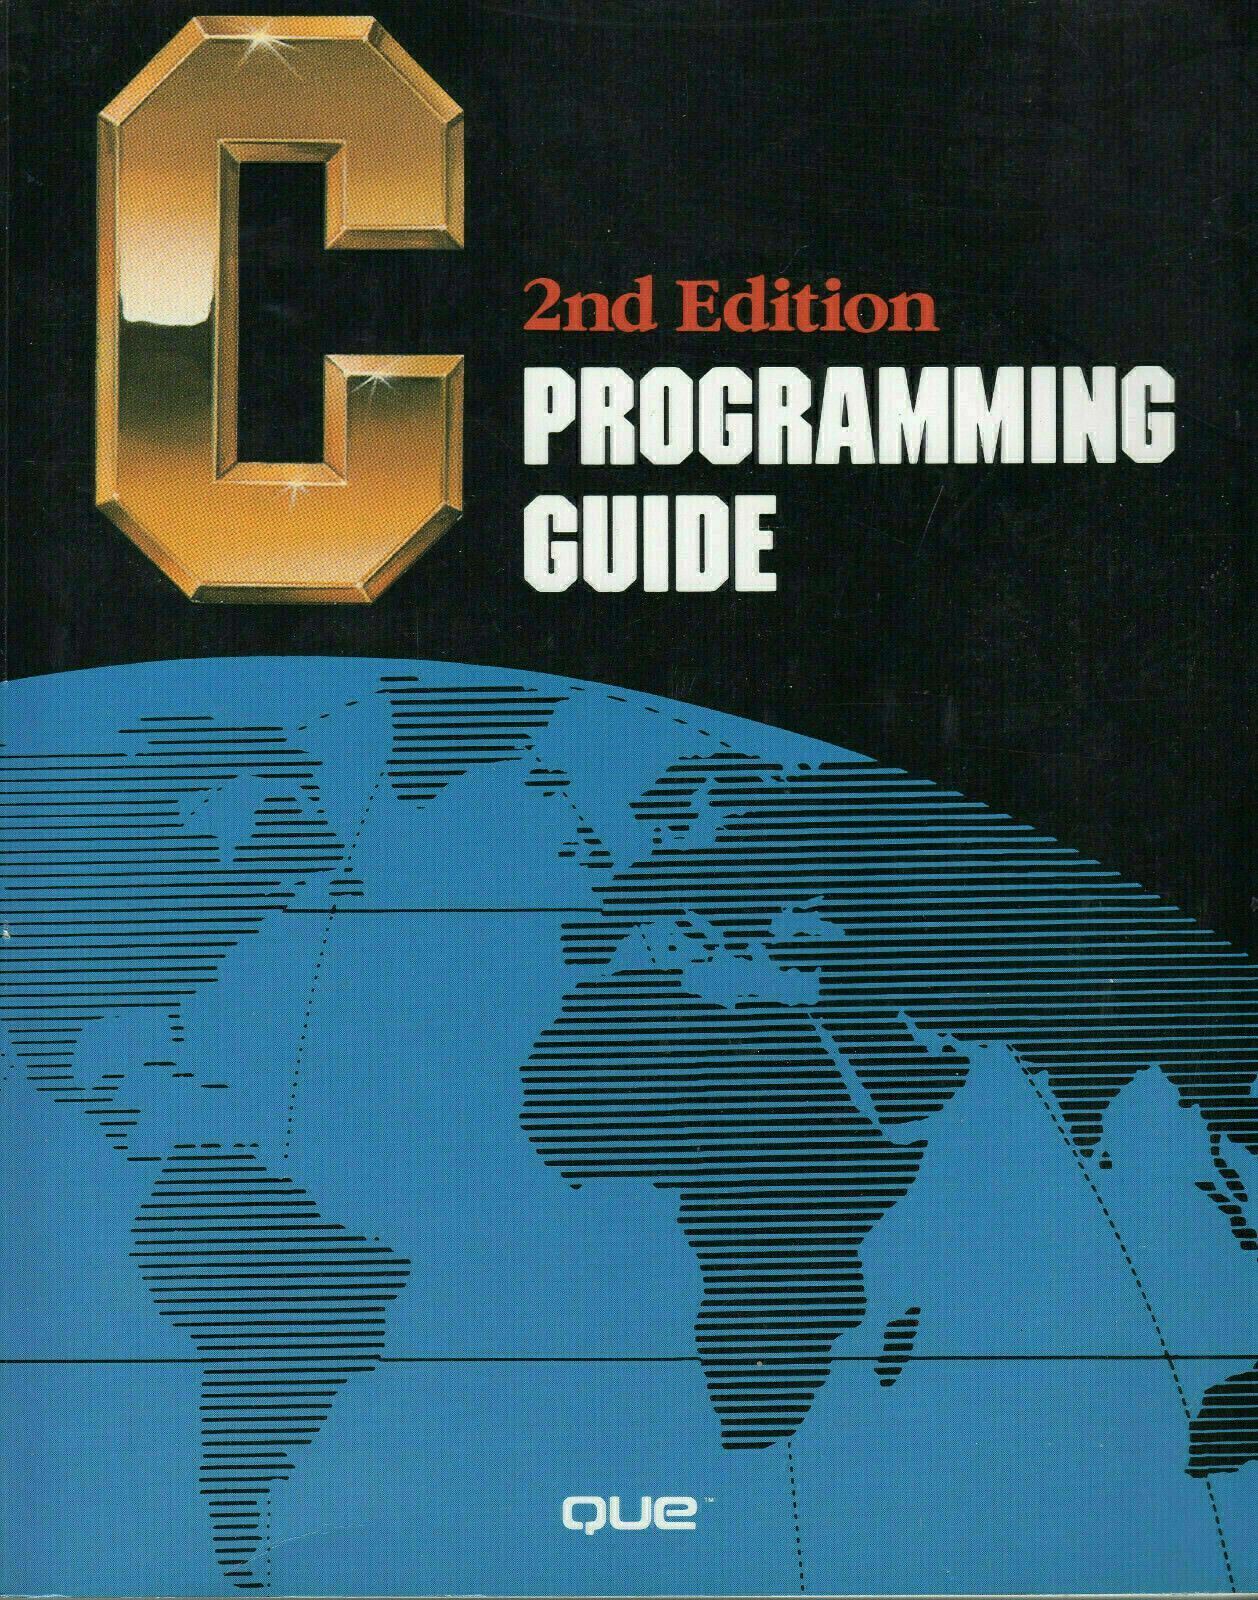 ITHistory (1985) Book; \